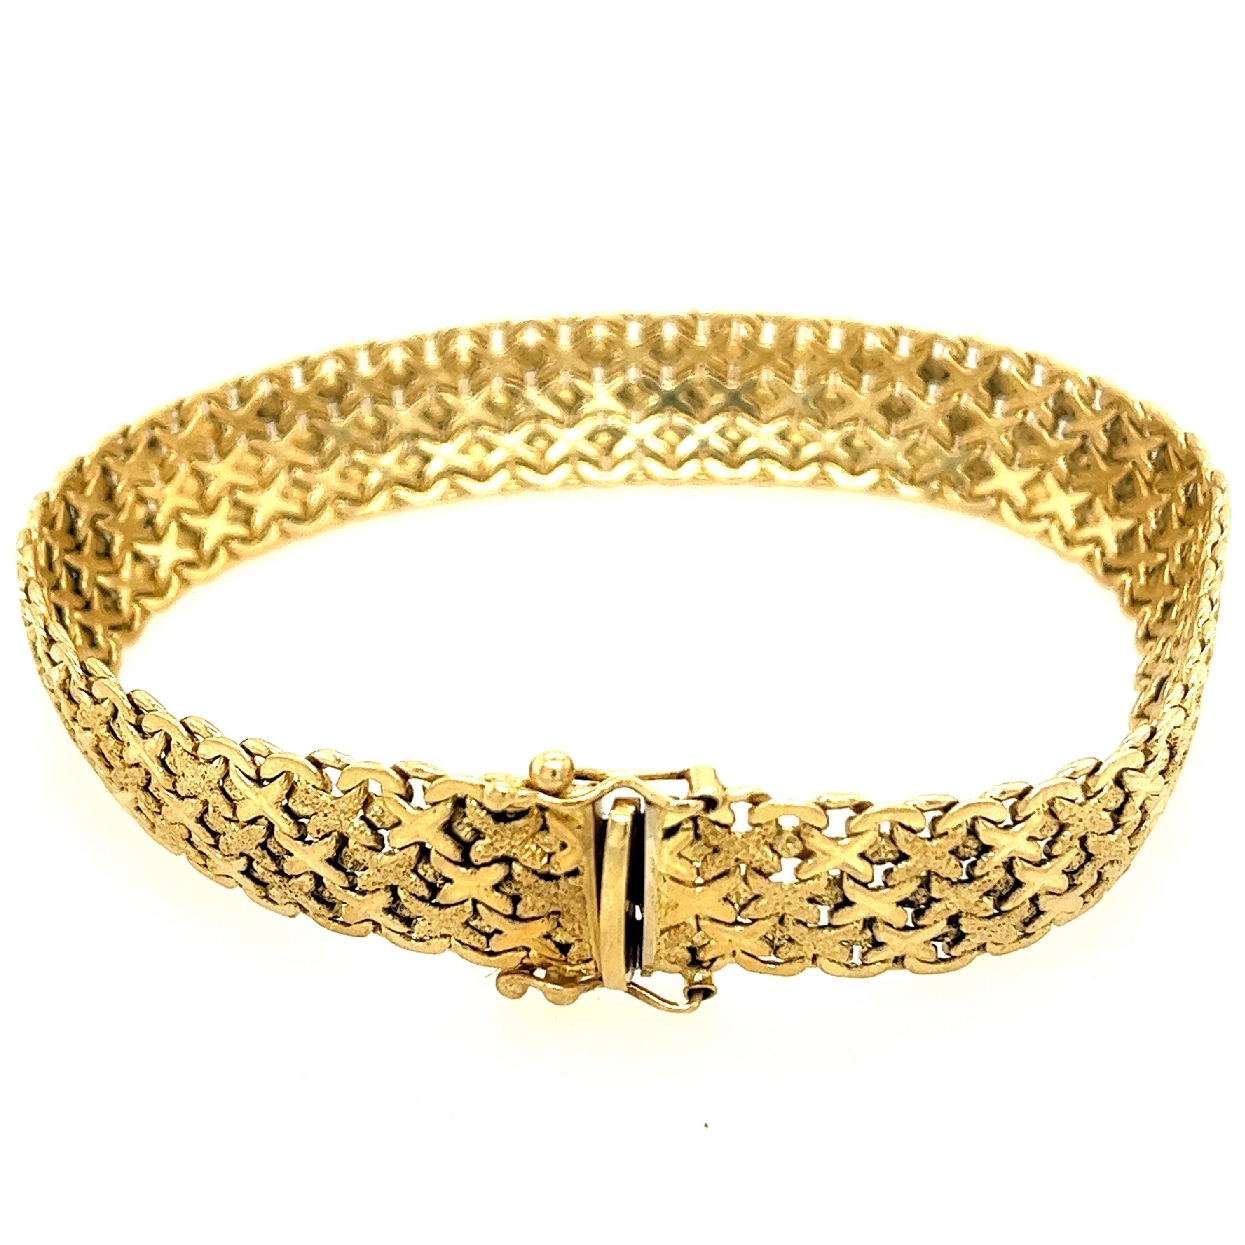 14K Yellow Gold Woven Bracelet 8 Inches